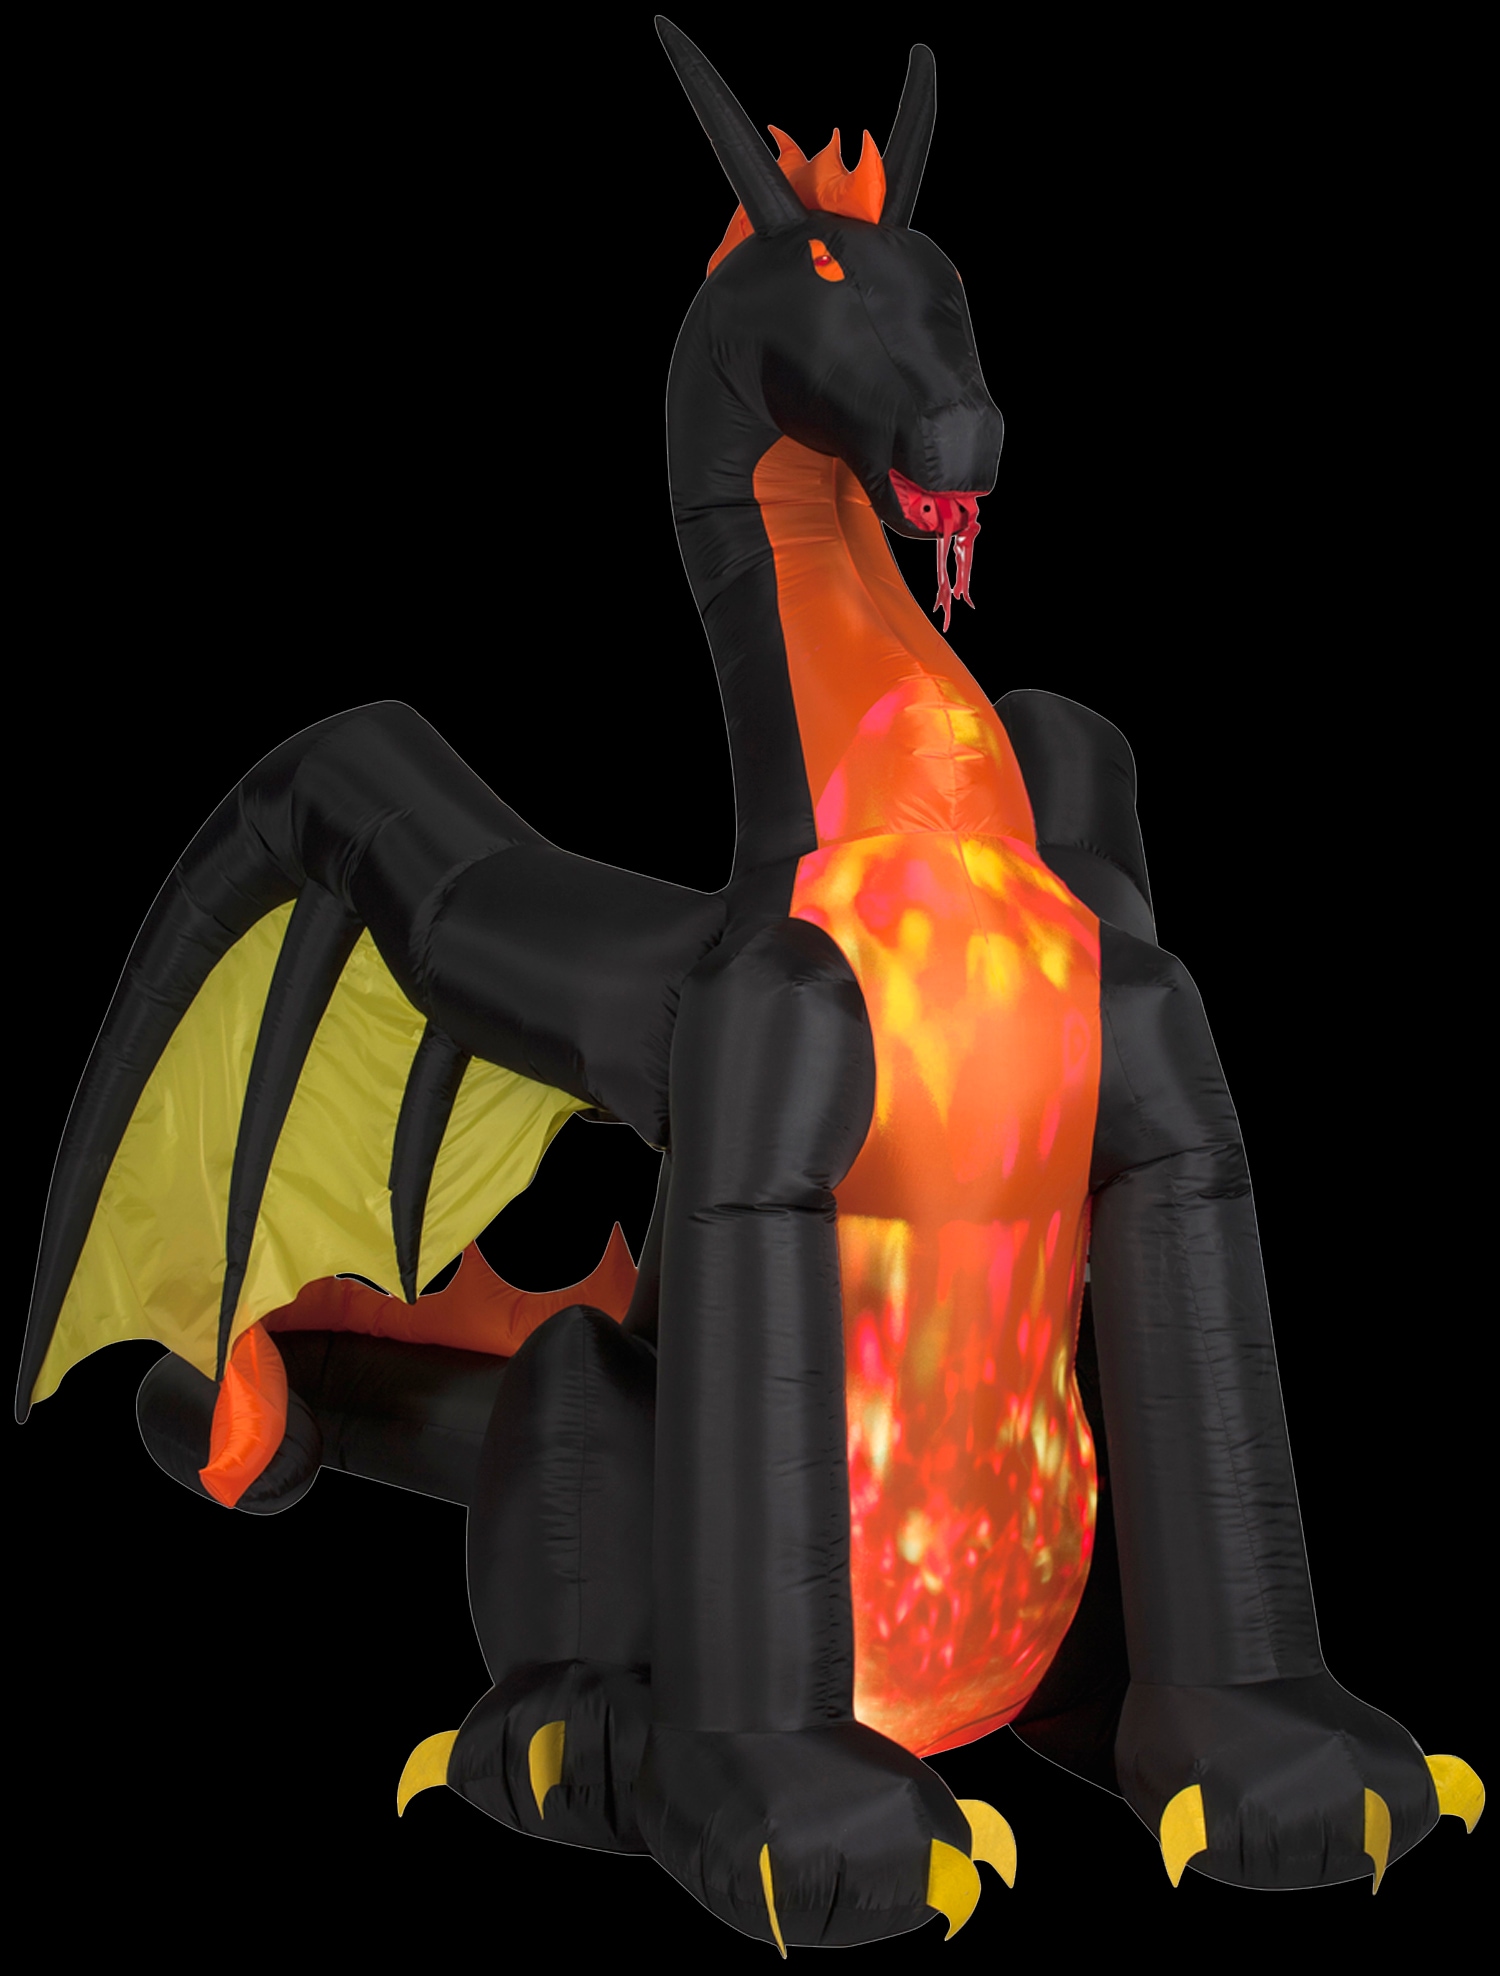 Halloween 9 ft Projection Inflatable Fire and Ice Dragon Animated Wings for sale online 